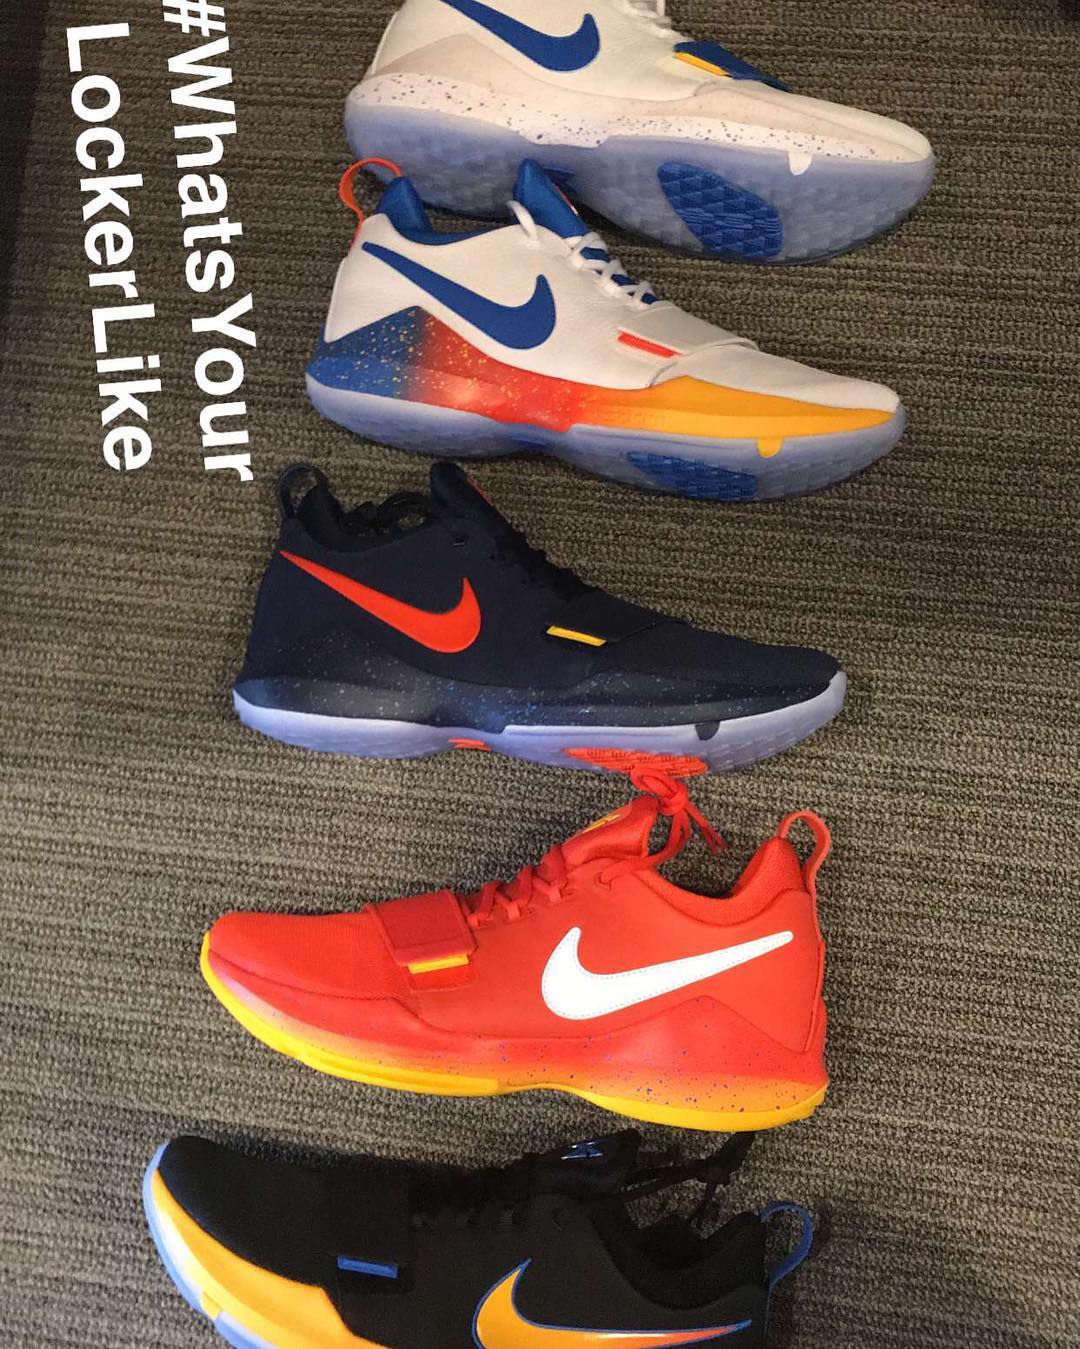 Paul George Shows Off Clean PG1 PEs 